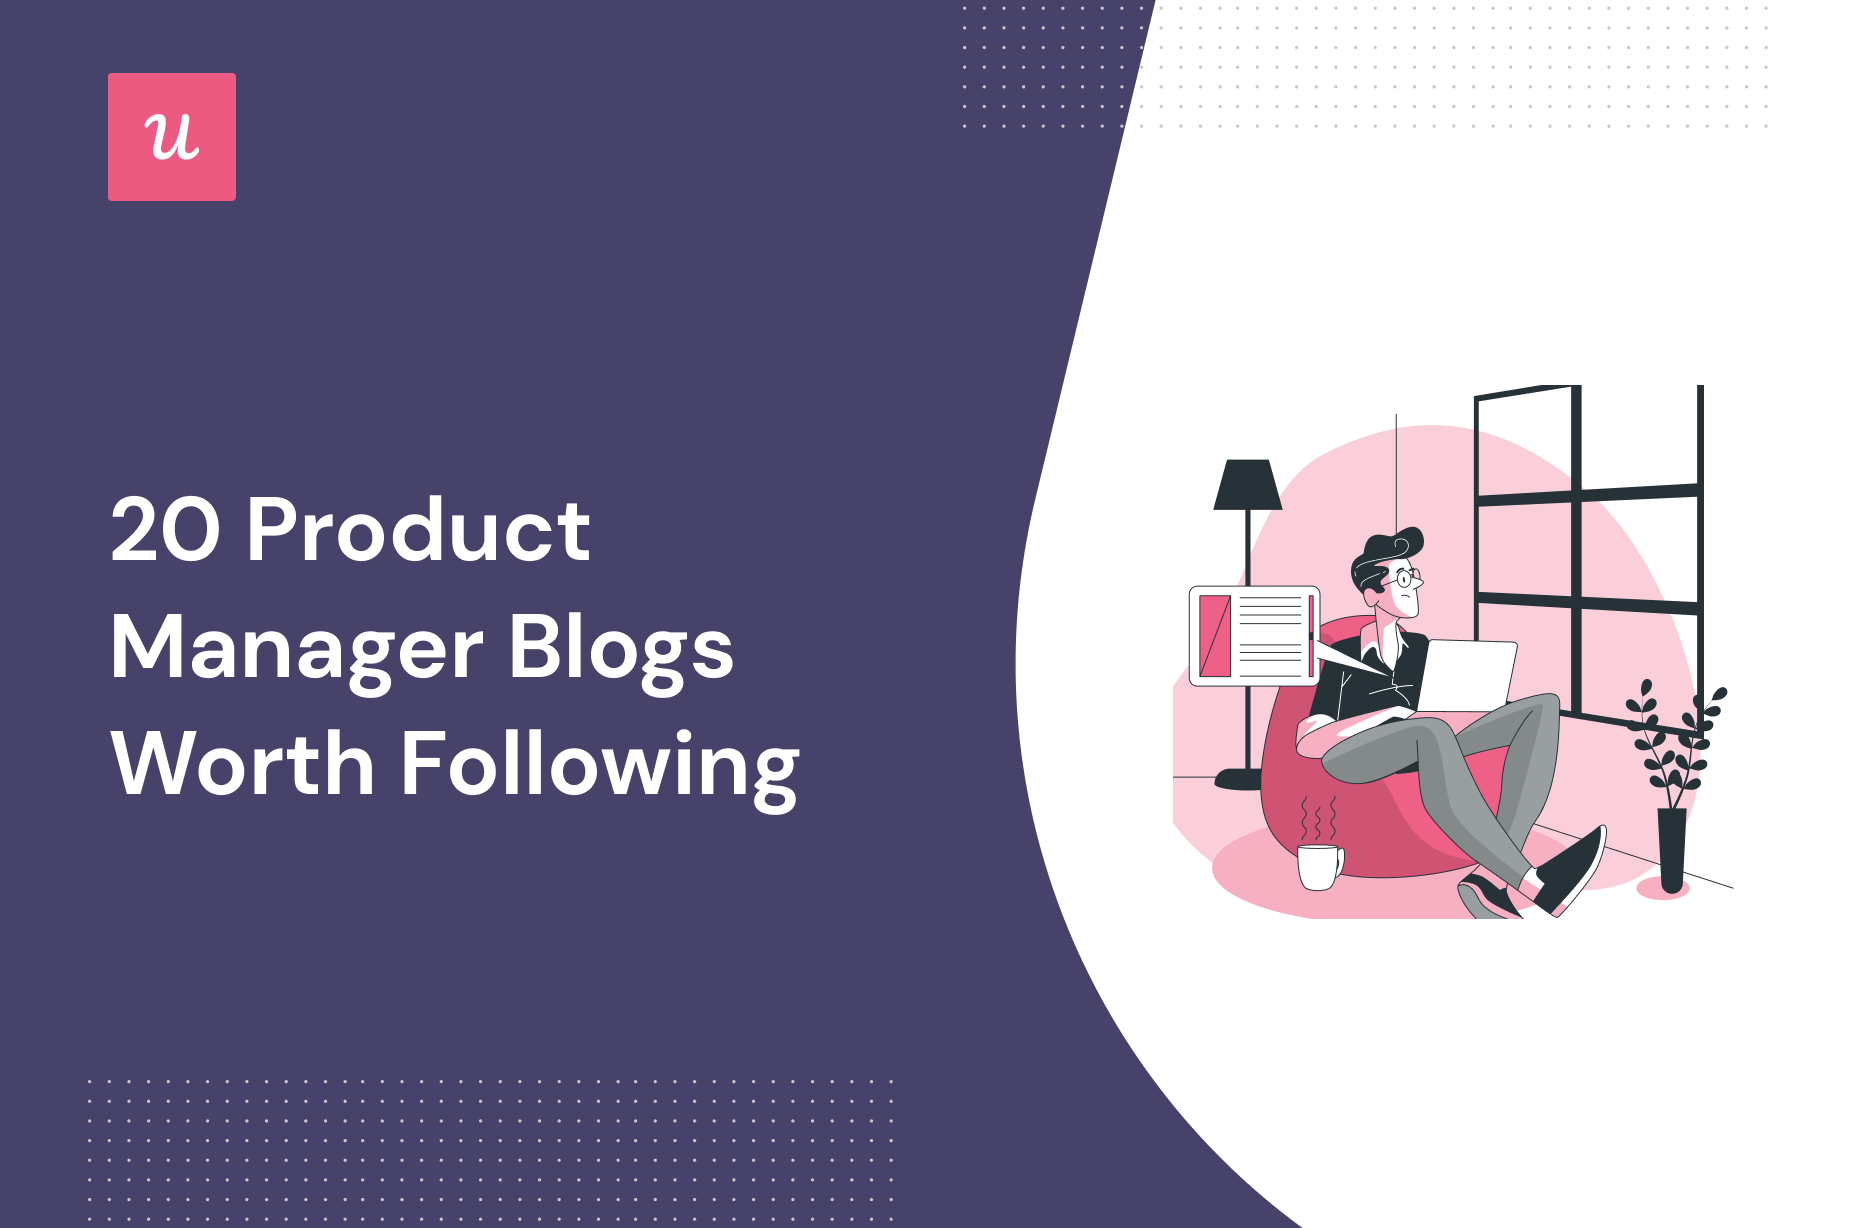 20 Product Manager Blogs Worth Following